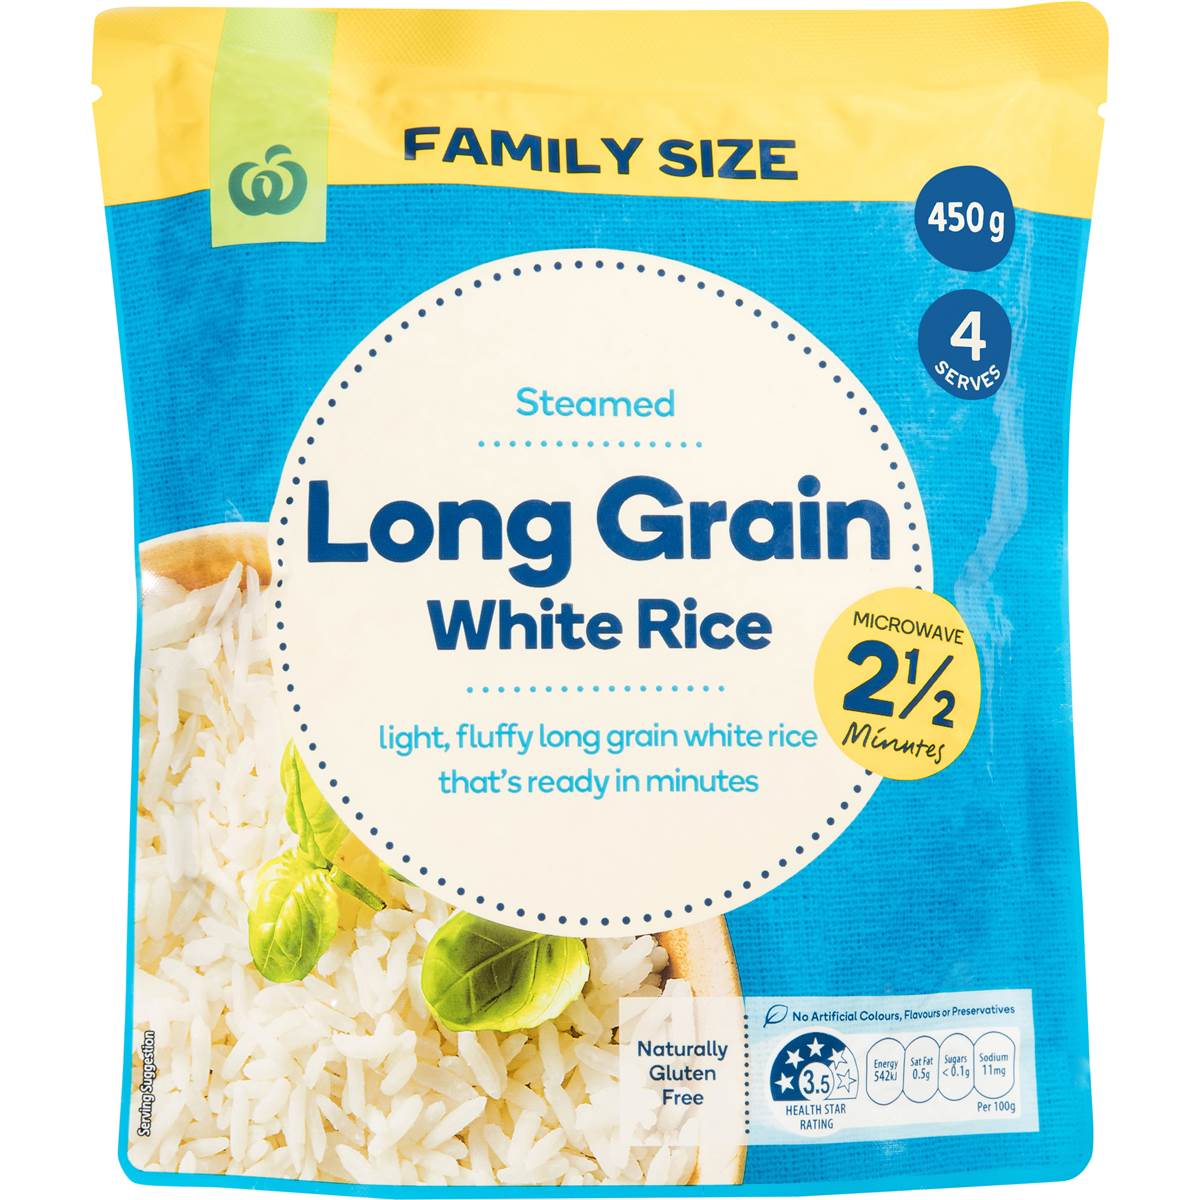 Calories in Woolworths Microwave White Long Grain Rice Family